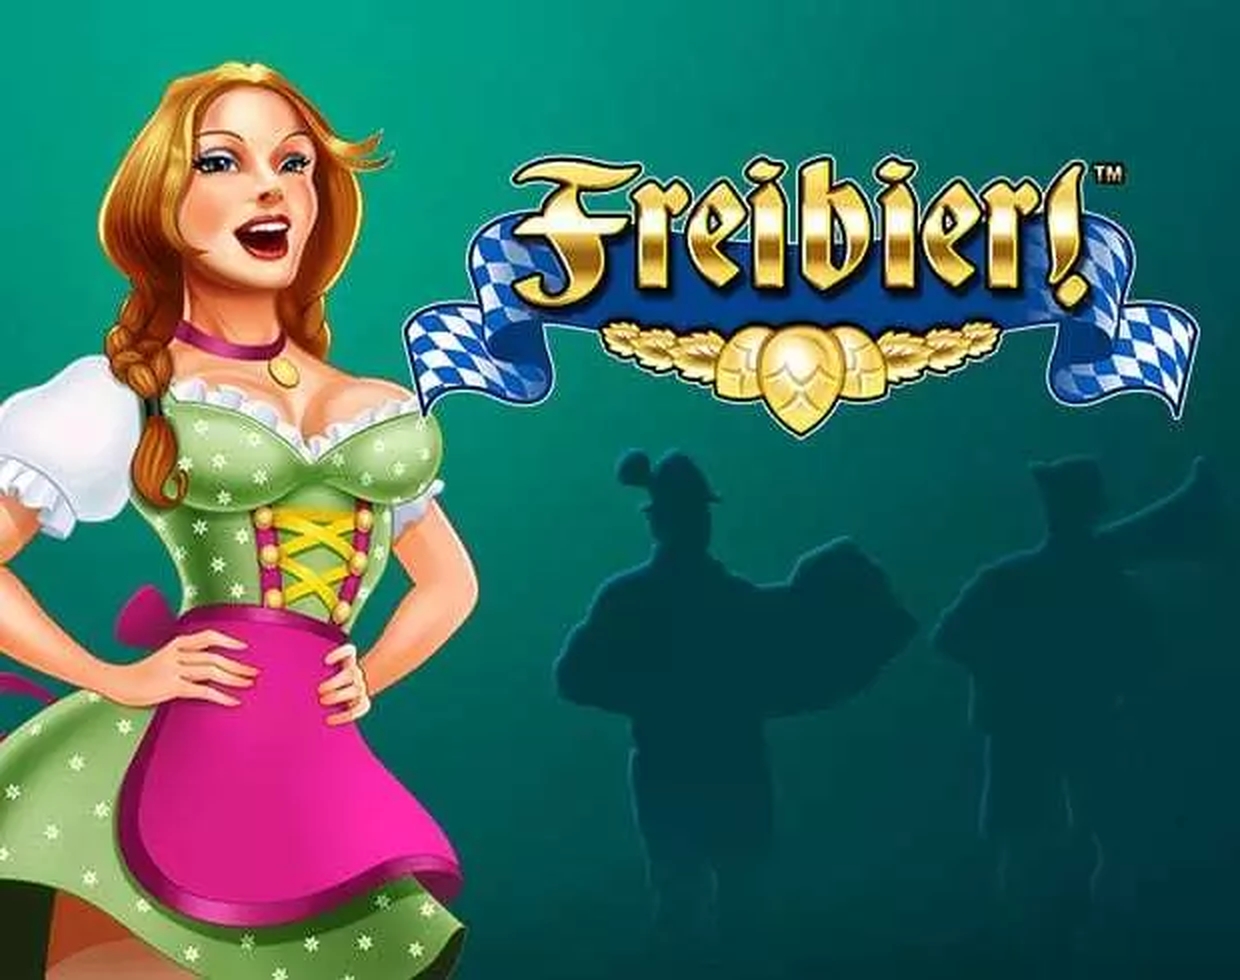 The Freibier! Online Slot Demo Game by Greentube